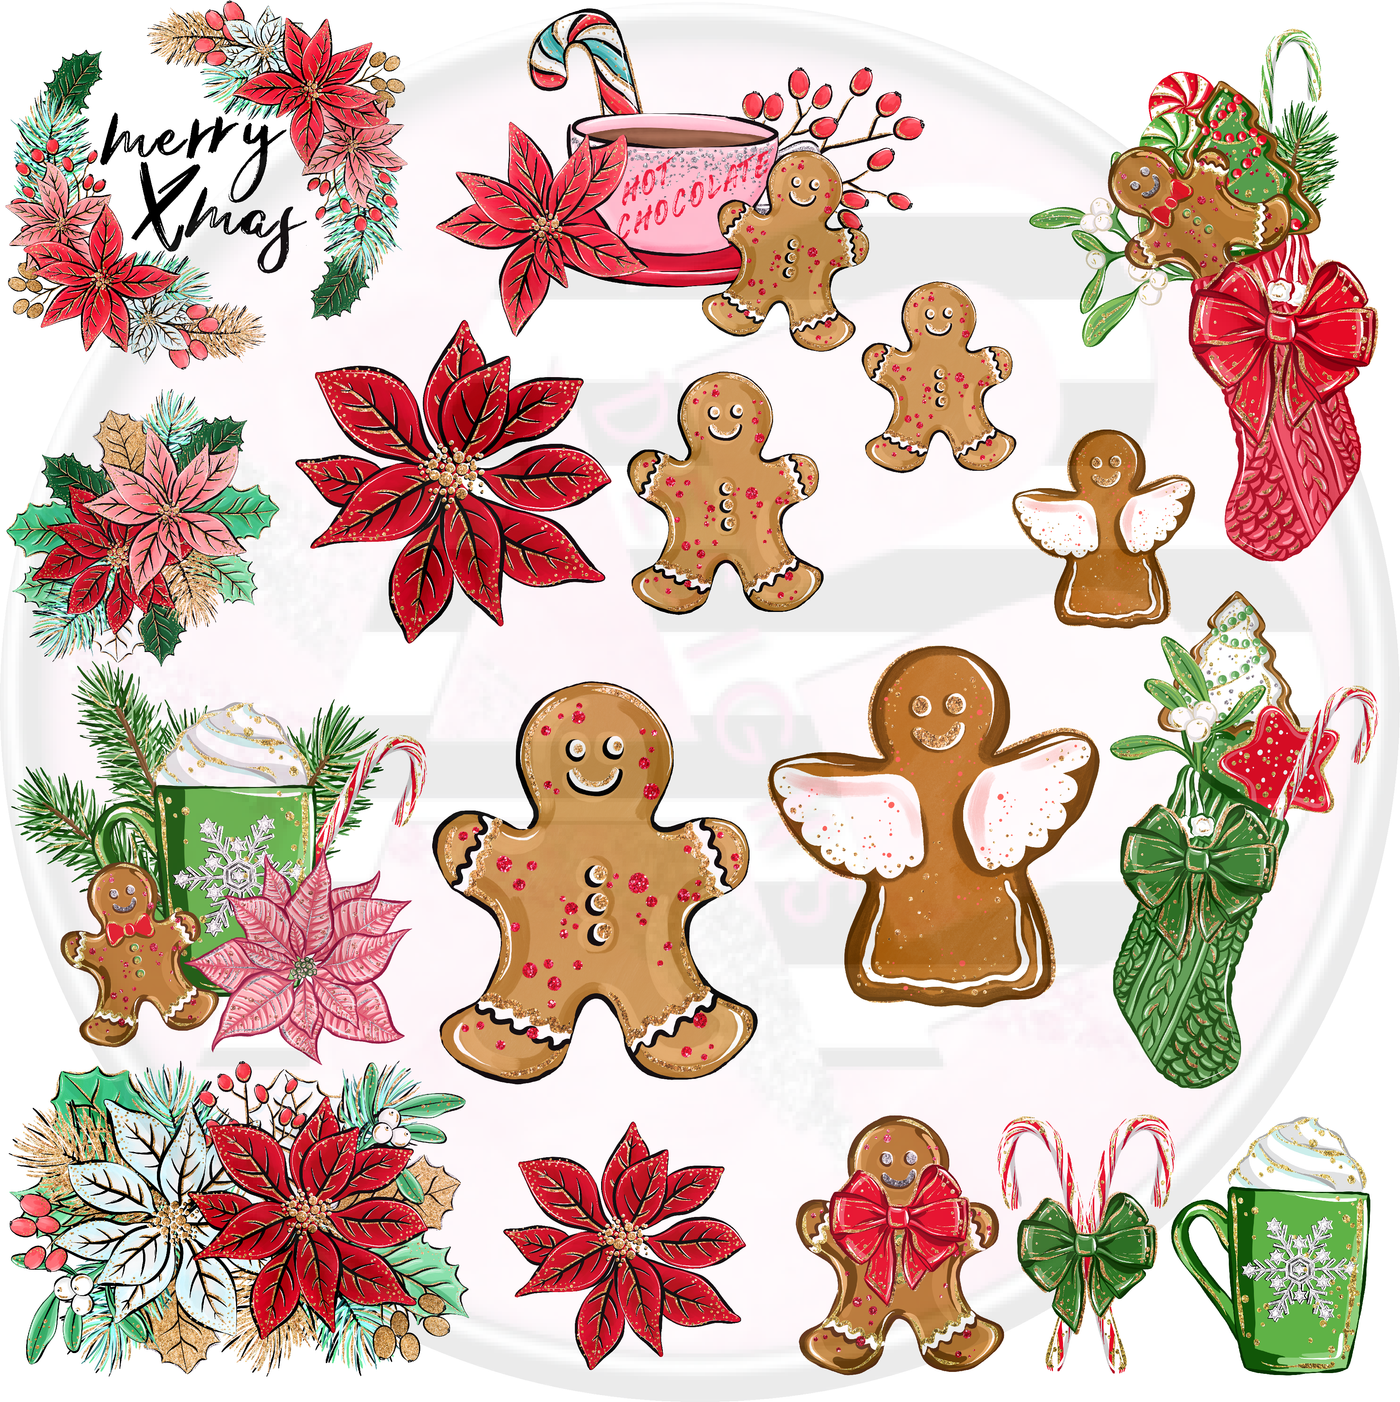 Gingerbread 01 Full Sheet 12x12 Clear Cast Decal